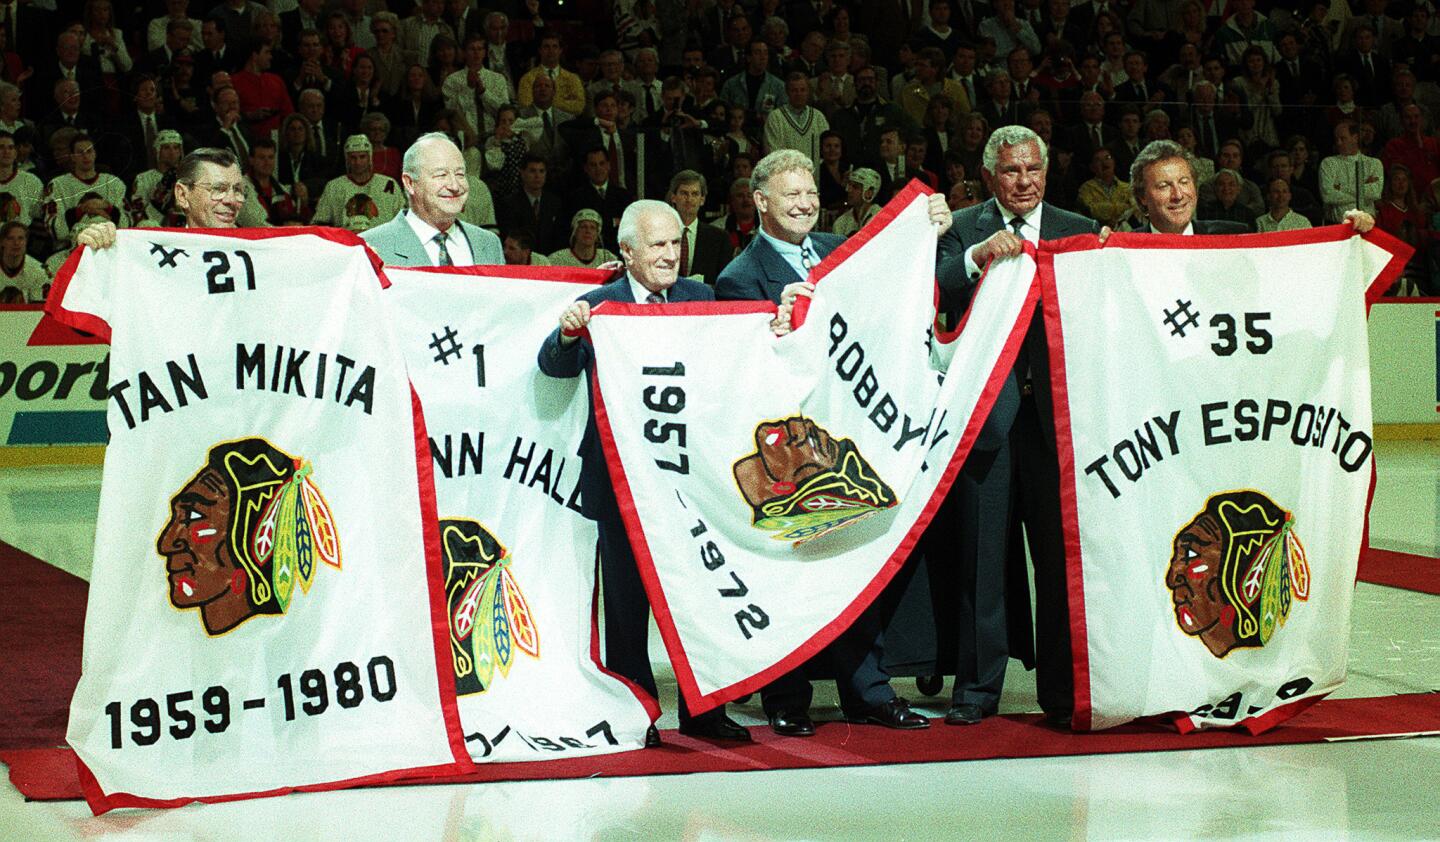 Former Blackhawks players pose with their retired jersey numbers on banners during a ceremony at the old Chicago Stadium before the start of the last regular season Hawks game there in 1994. Stan Mikita, from left, Glenn Hall, former GM Tommy Ivan, Bobby Hull, Hawks owner Bill Wirtz and Tony Esposito.